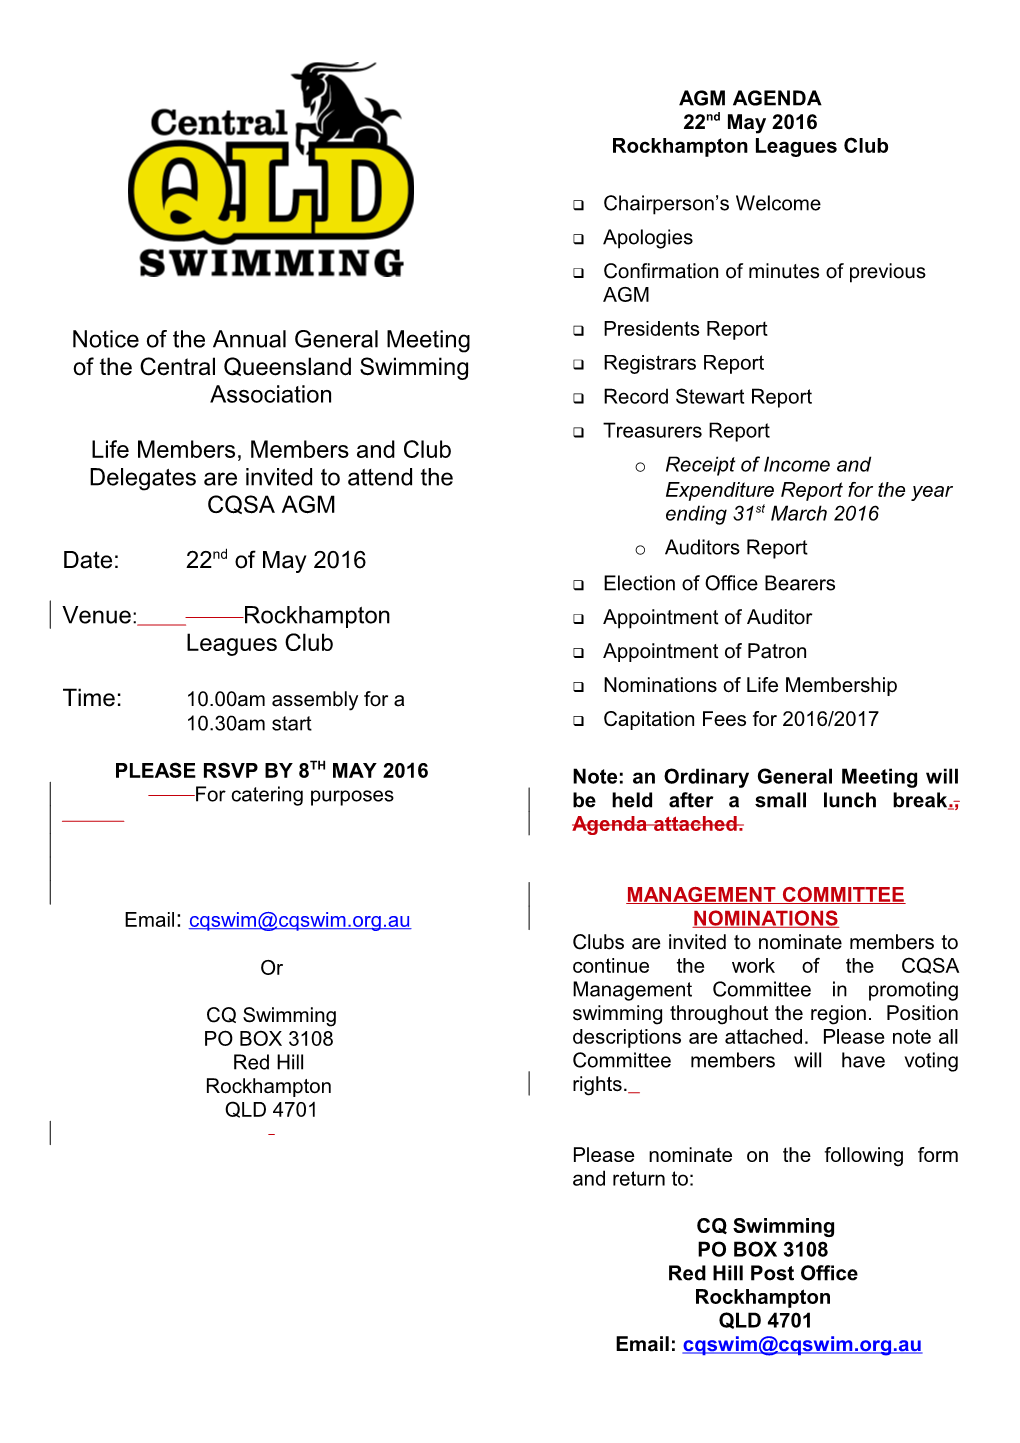 Notice of the Annual General Meeting of the Central Queensland Swimming Association